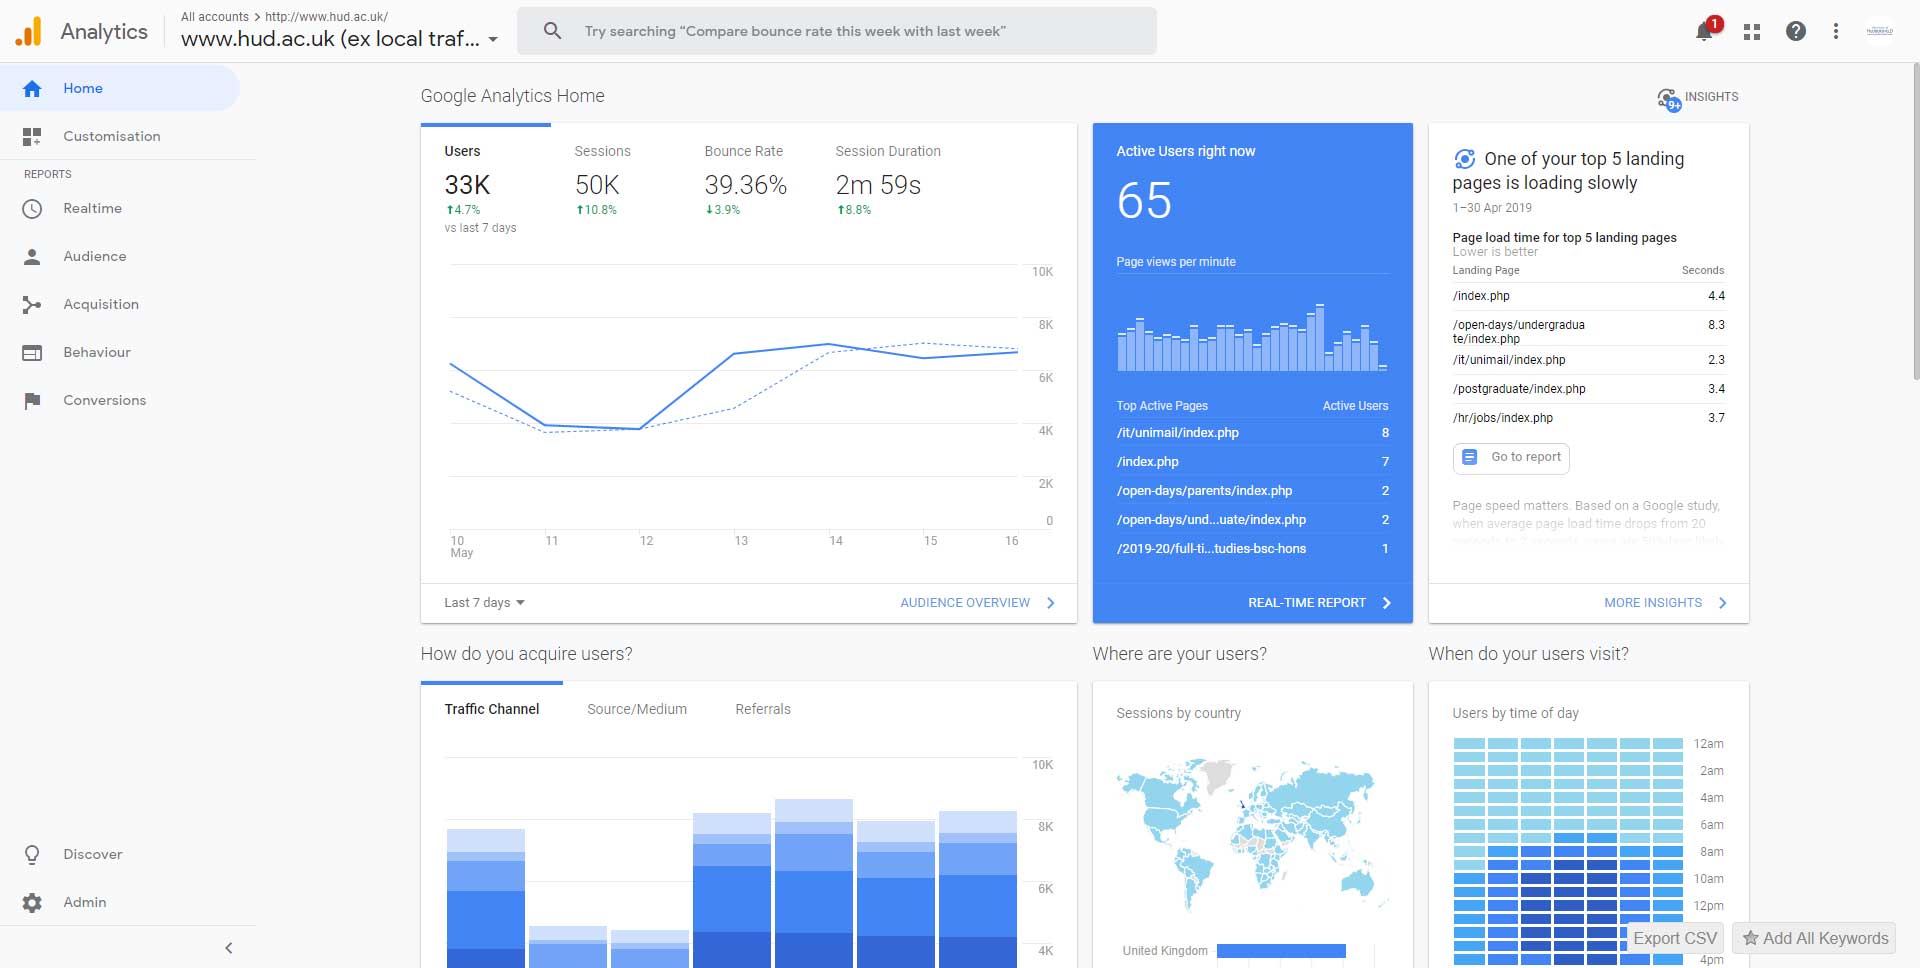 Picture of the homepage for Google Analytics